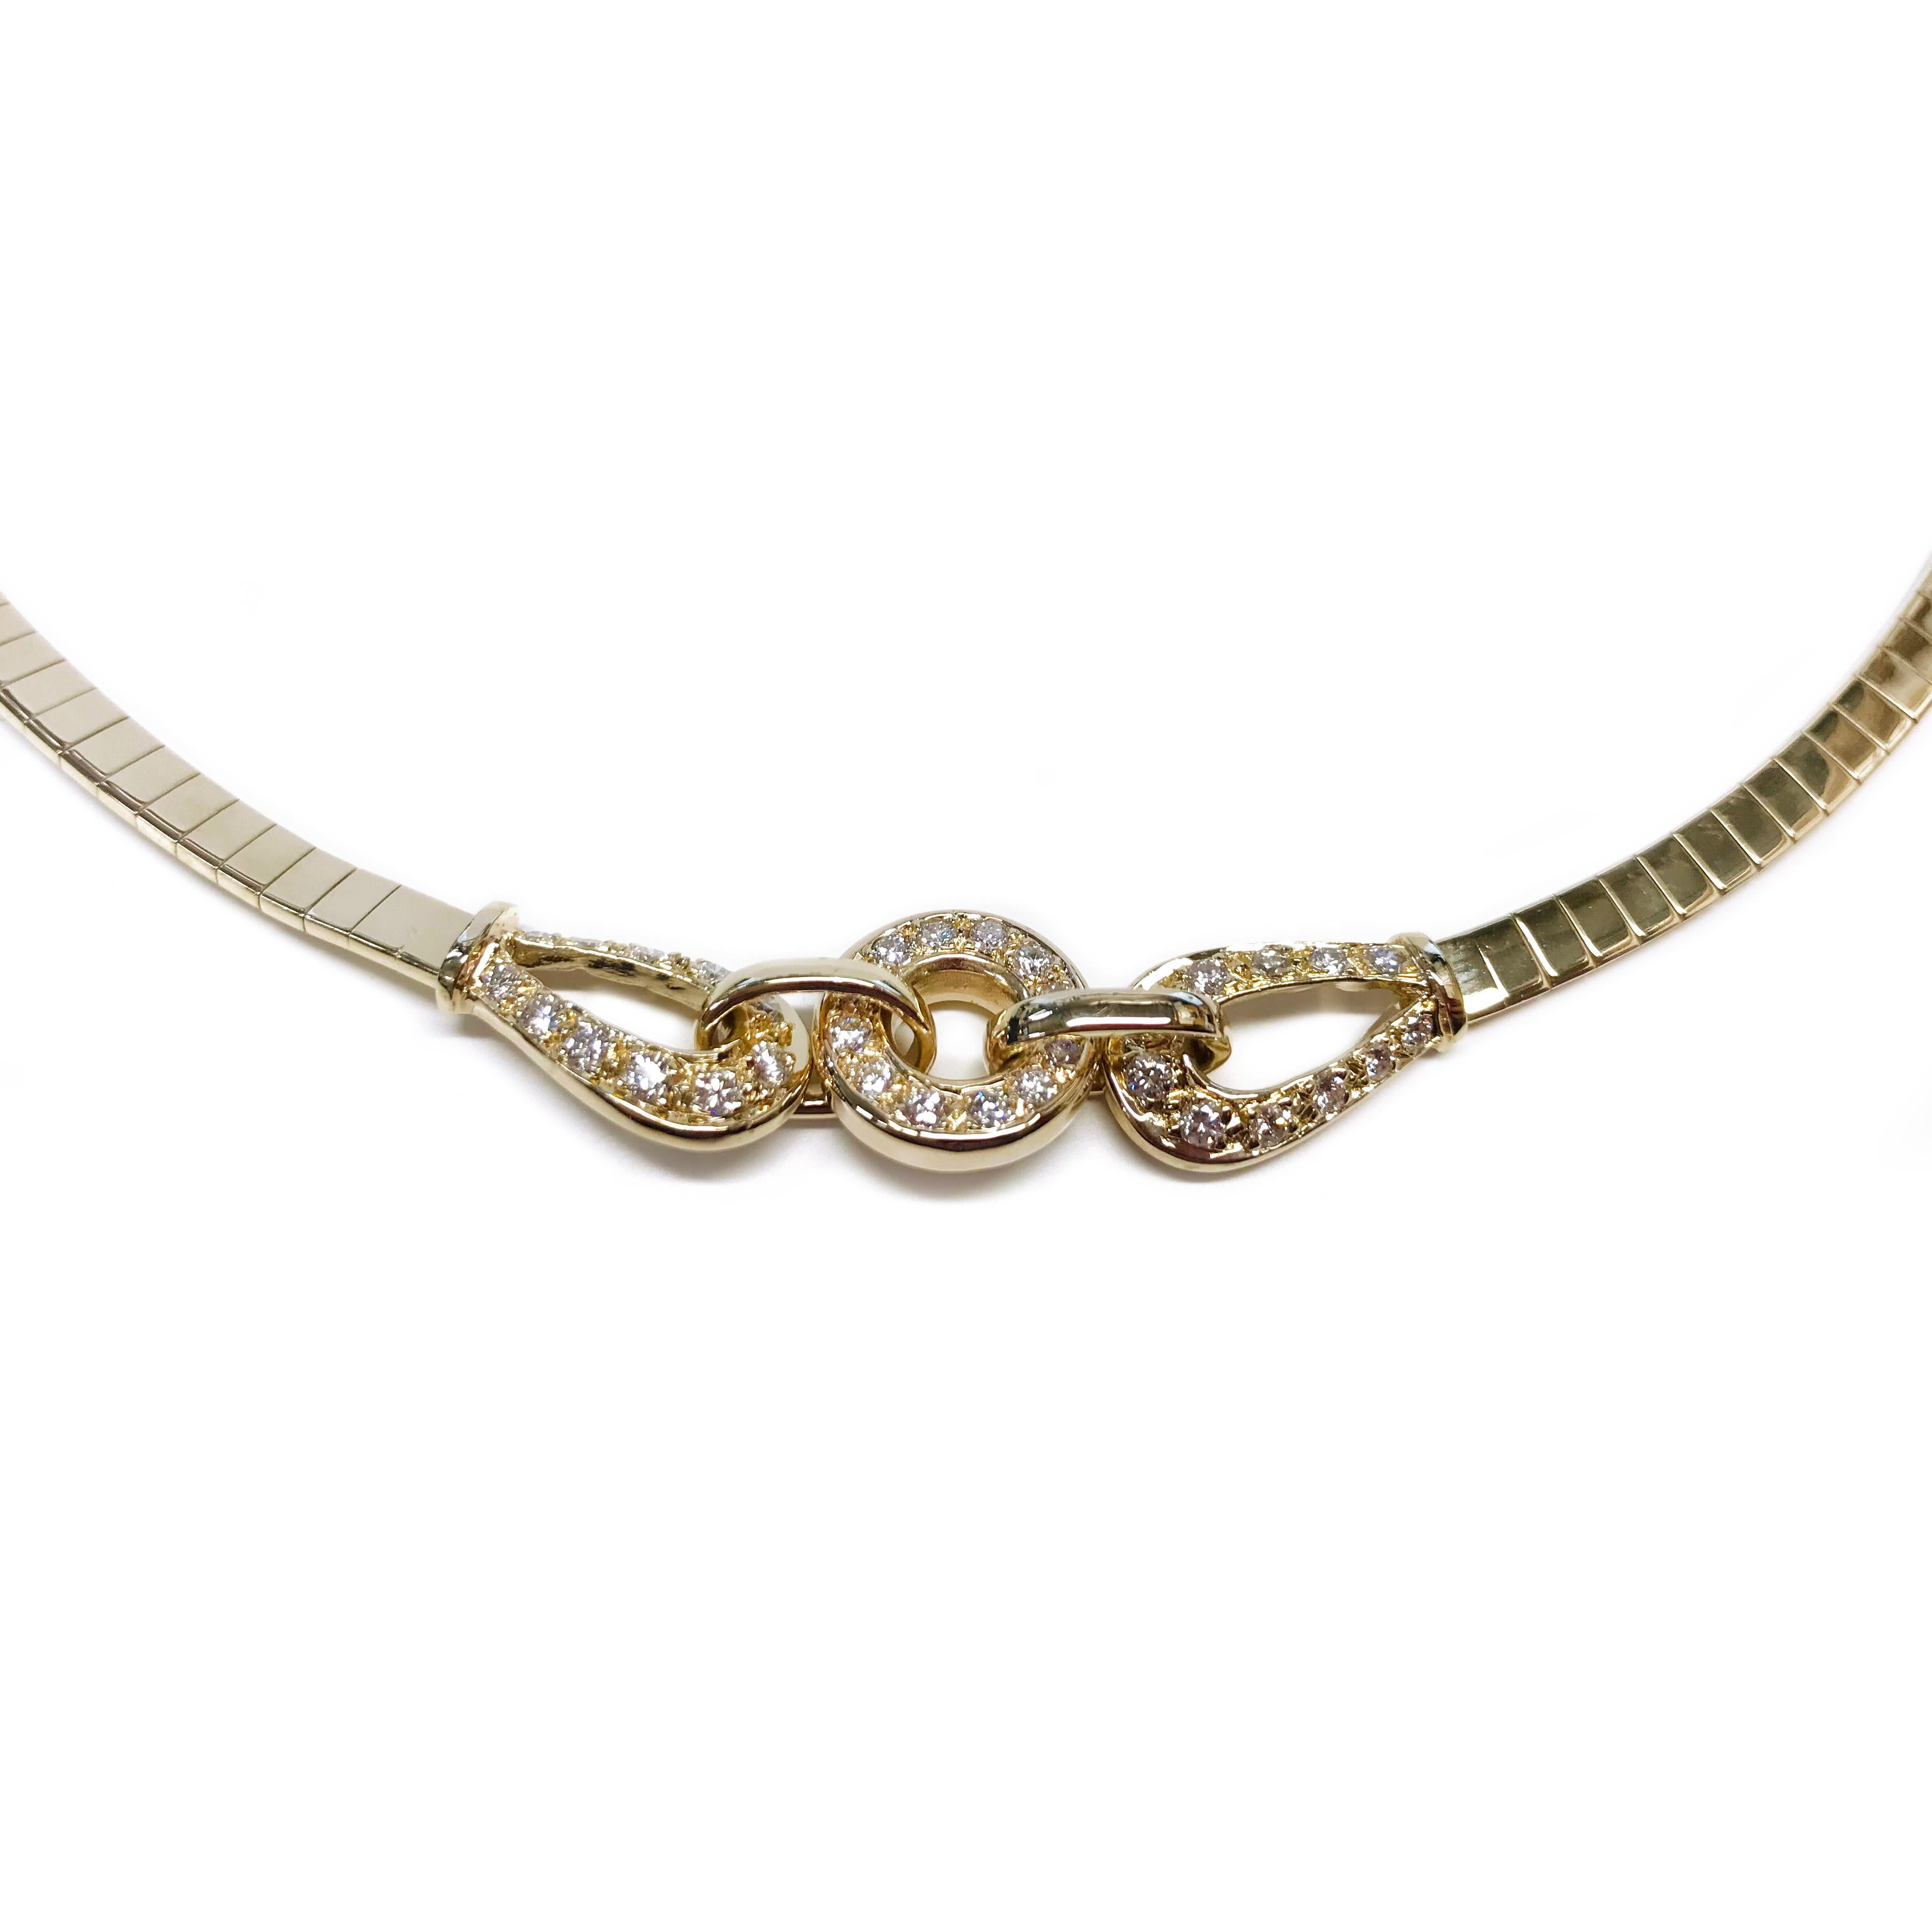 14 Karat Gold Italian Omega Diamond Necklace. The 4mm necklace features thirty-five pave-set 2mm round diamonds for a total carat weight of 1.03ctw. Stamped on the back of the clasp is 14K ITALY. The necklace has a box closure with a safety eight.